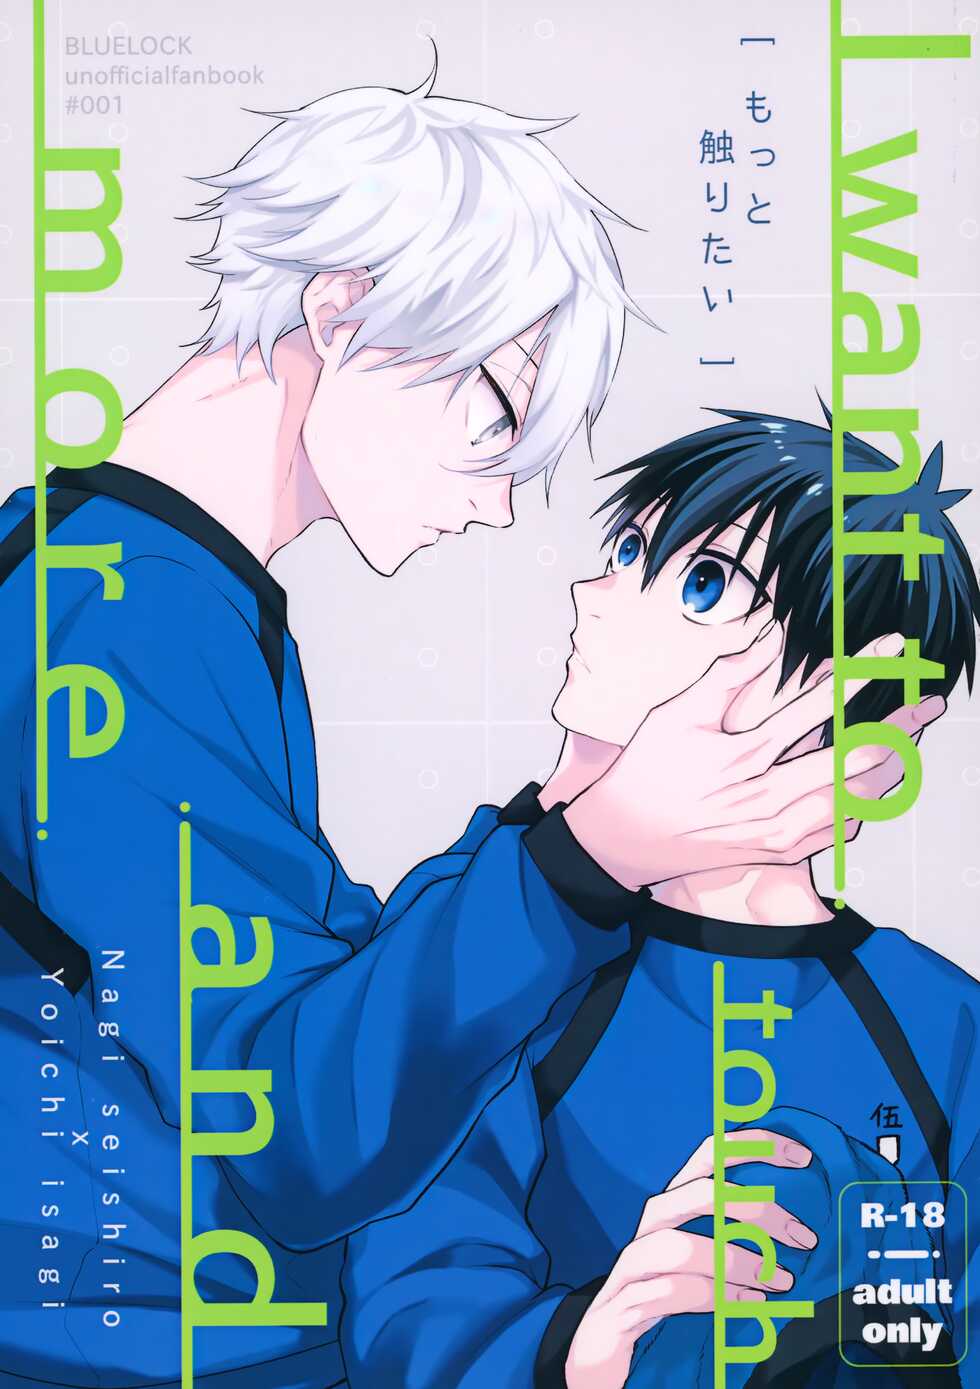 (Seishun Egoism 2) [RoLOCK (Ichi)] Motto Sawaritai - I want to touch and more (Blue Lock) - Page 1